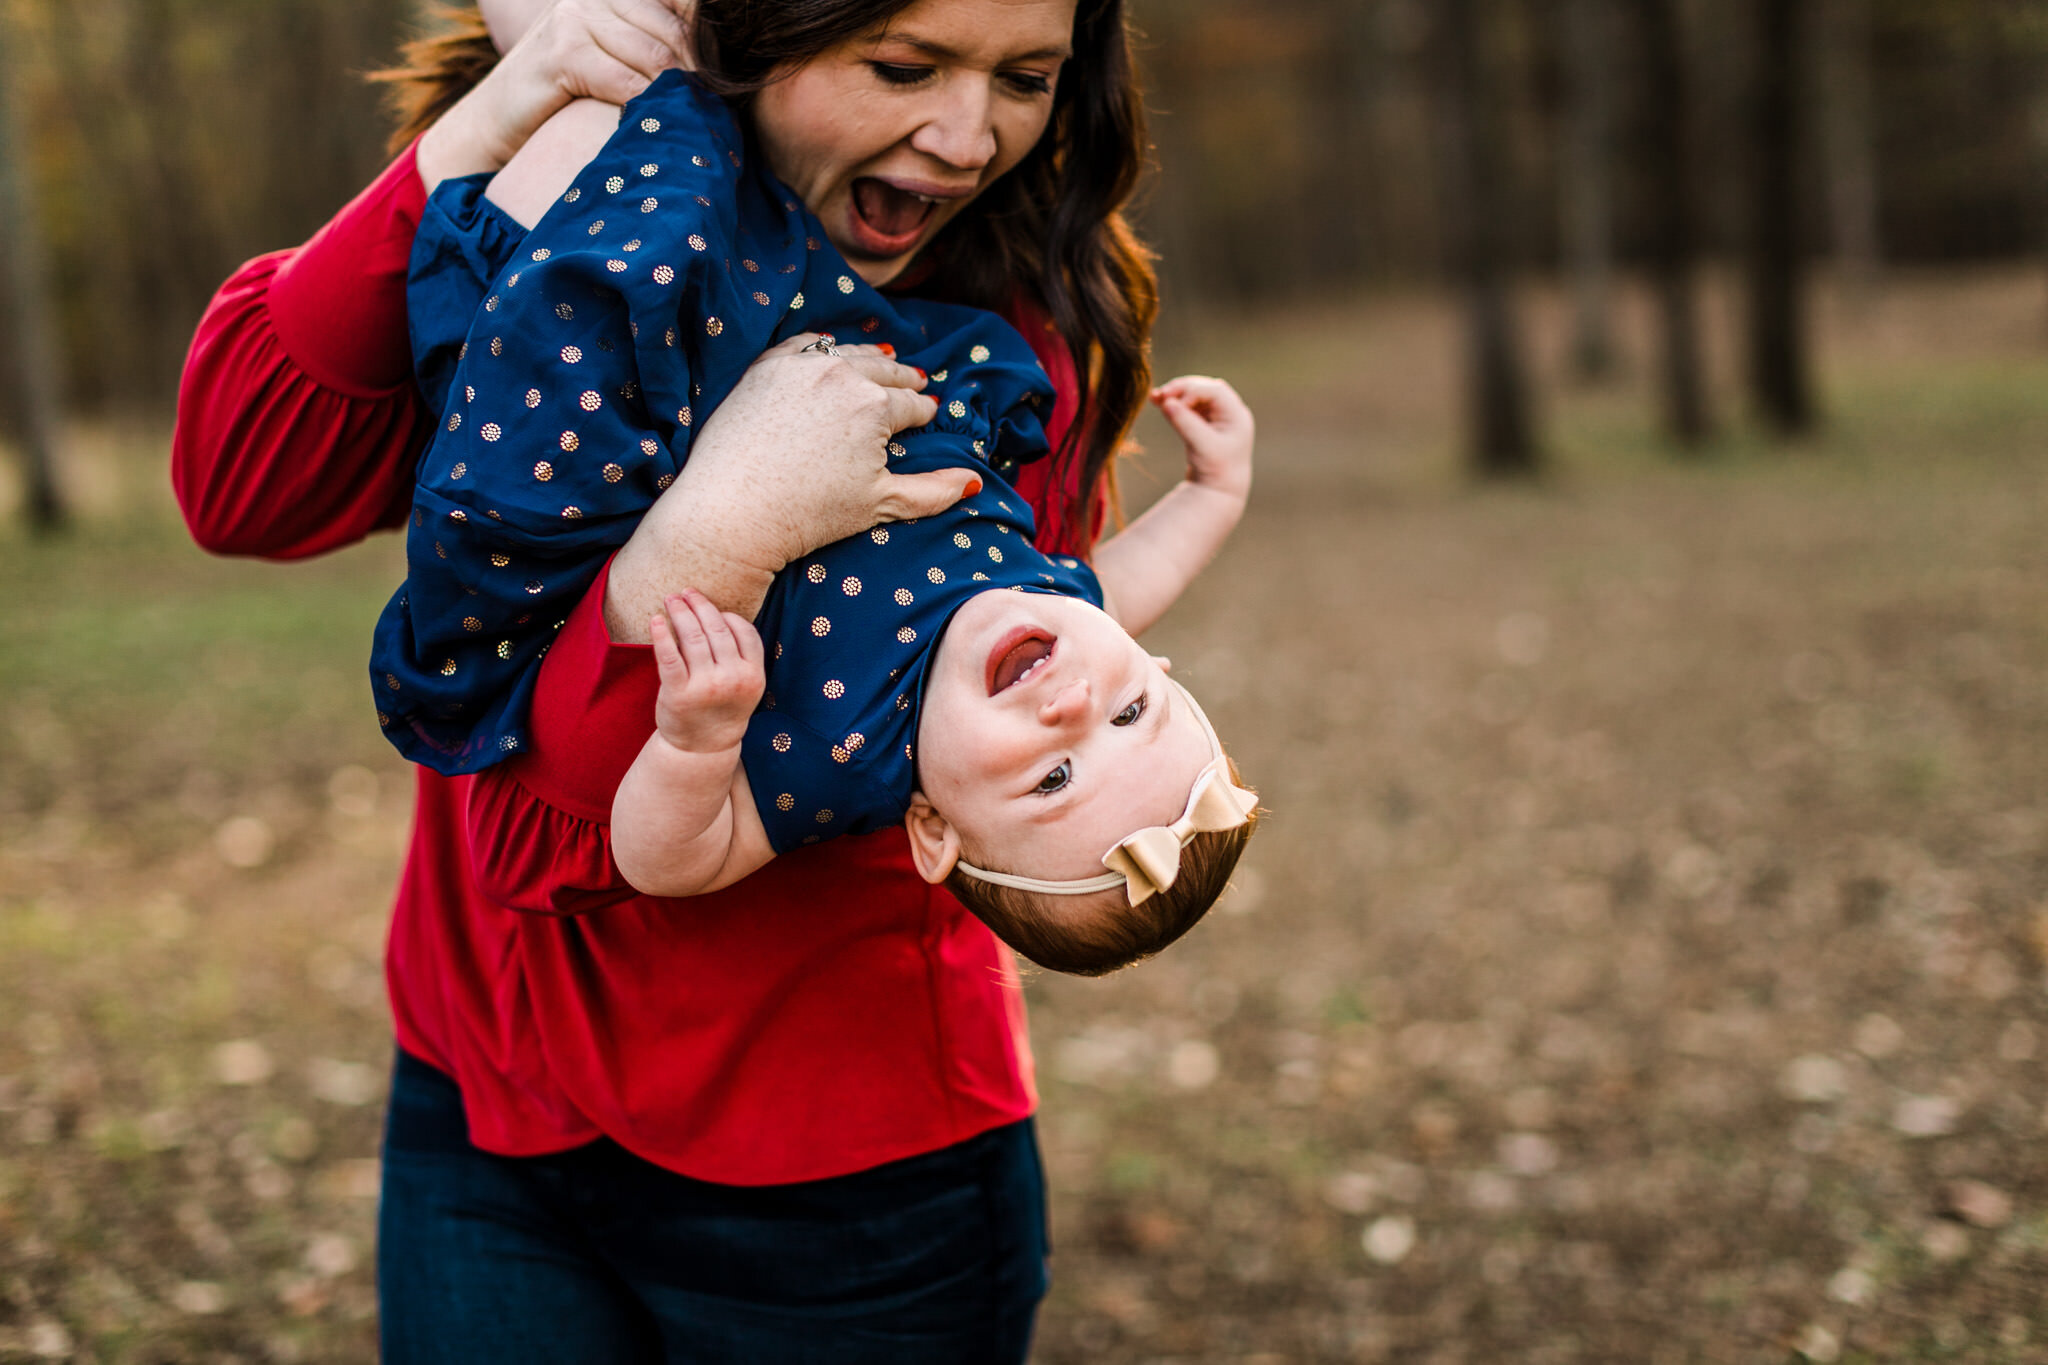 Durham Photographer | By G. Lin Photography | Mom tickling daughter outdoors | West Point on Eno River